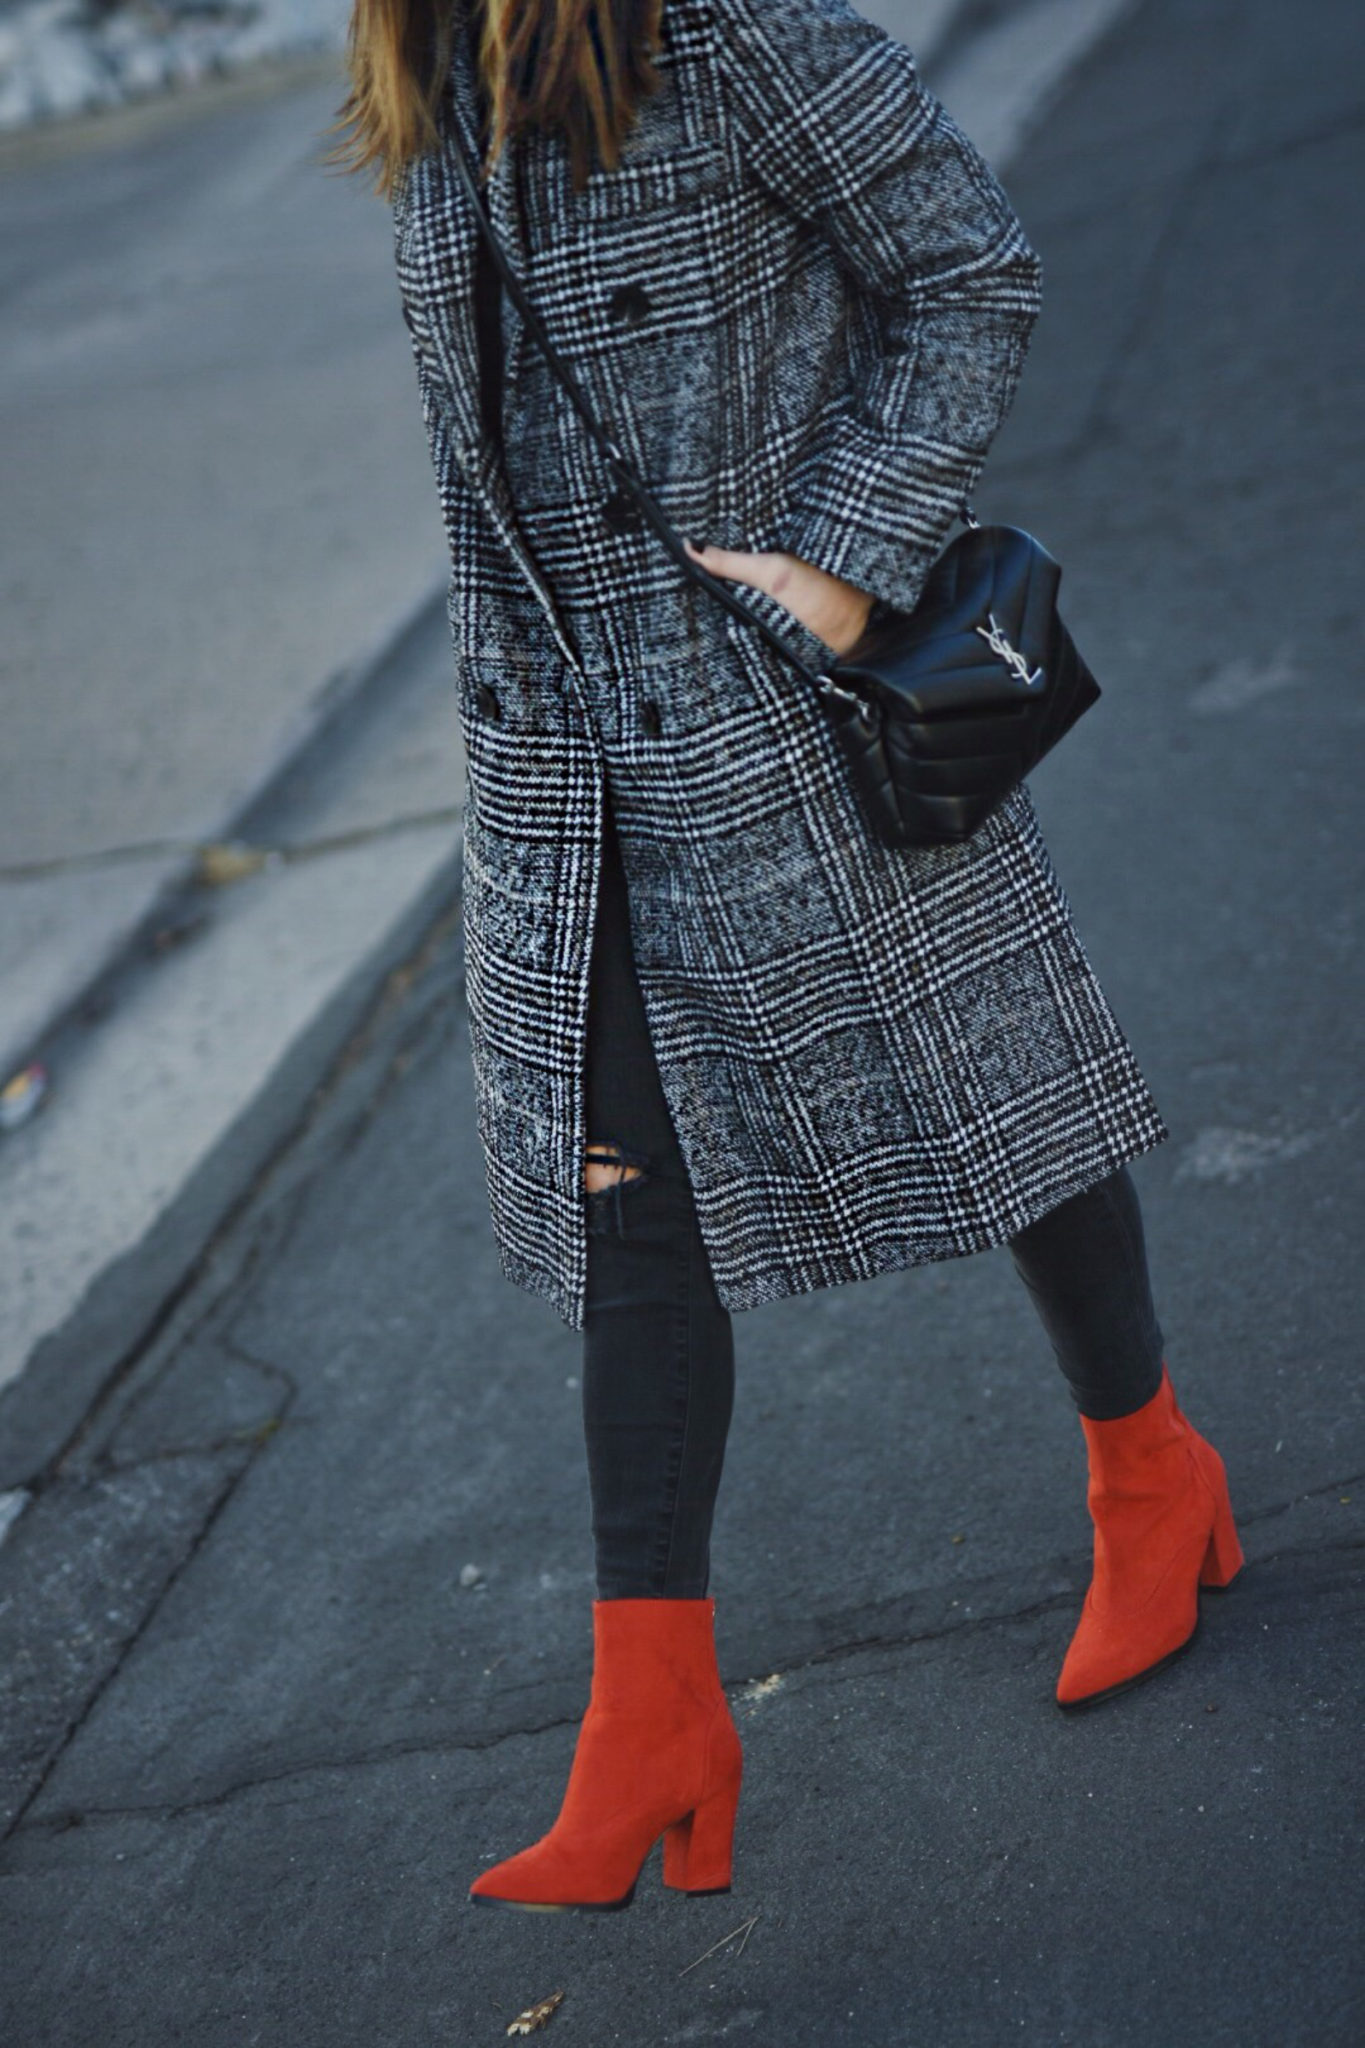 Carolina Hellal of Chic Talk wearing a Shein check print coat, River Island red boots, Madewell jeans and YSL crossbody bag.